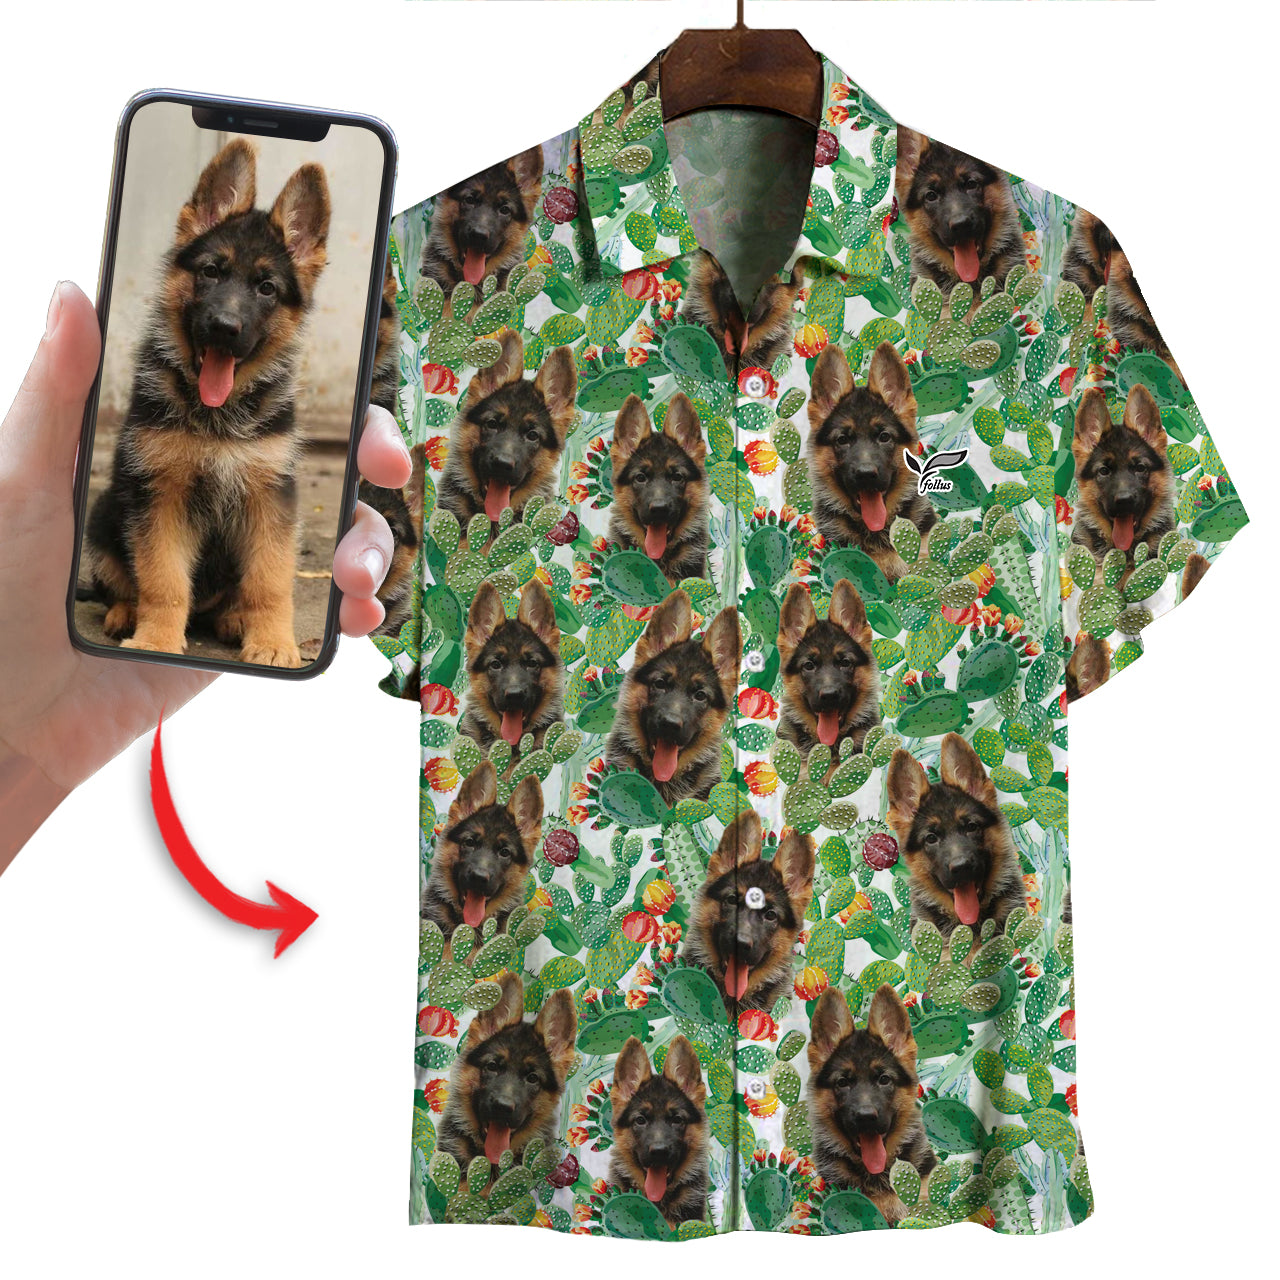 Personalized Hawaiian Shirt With Your Pet's Photo